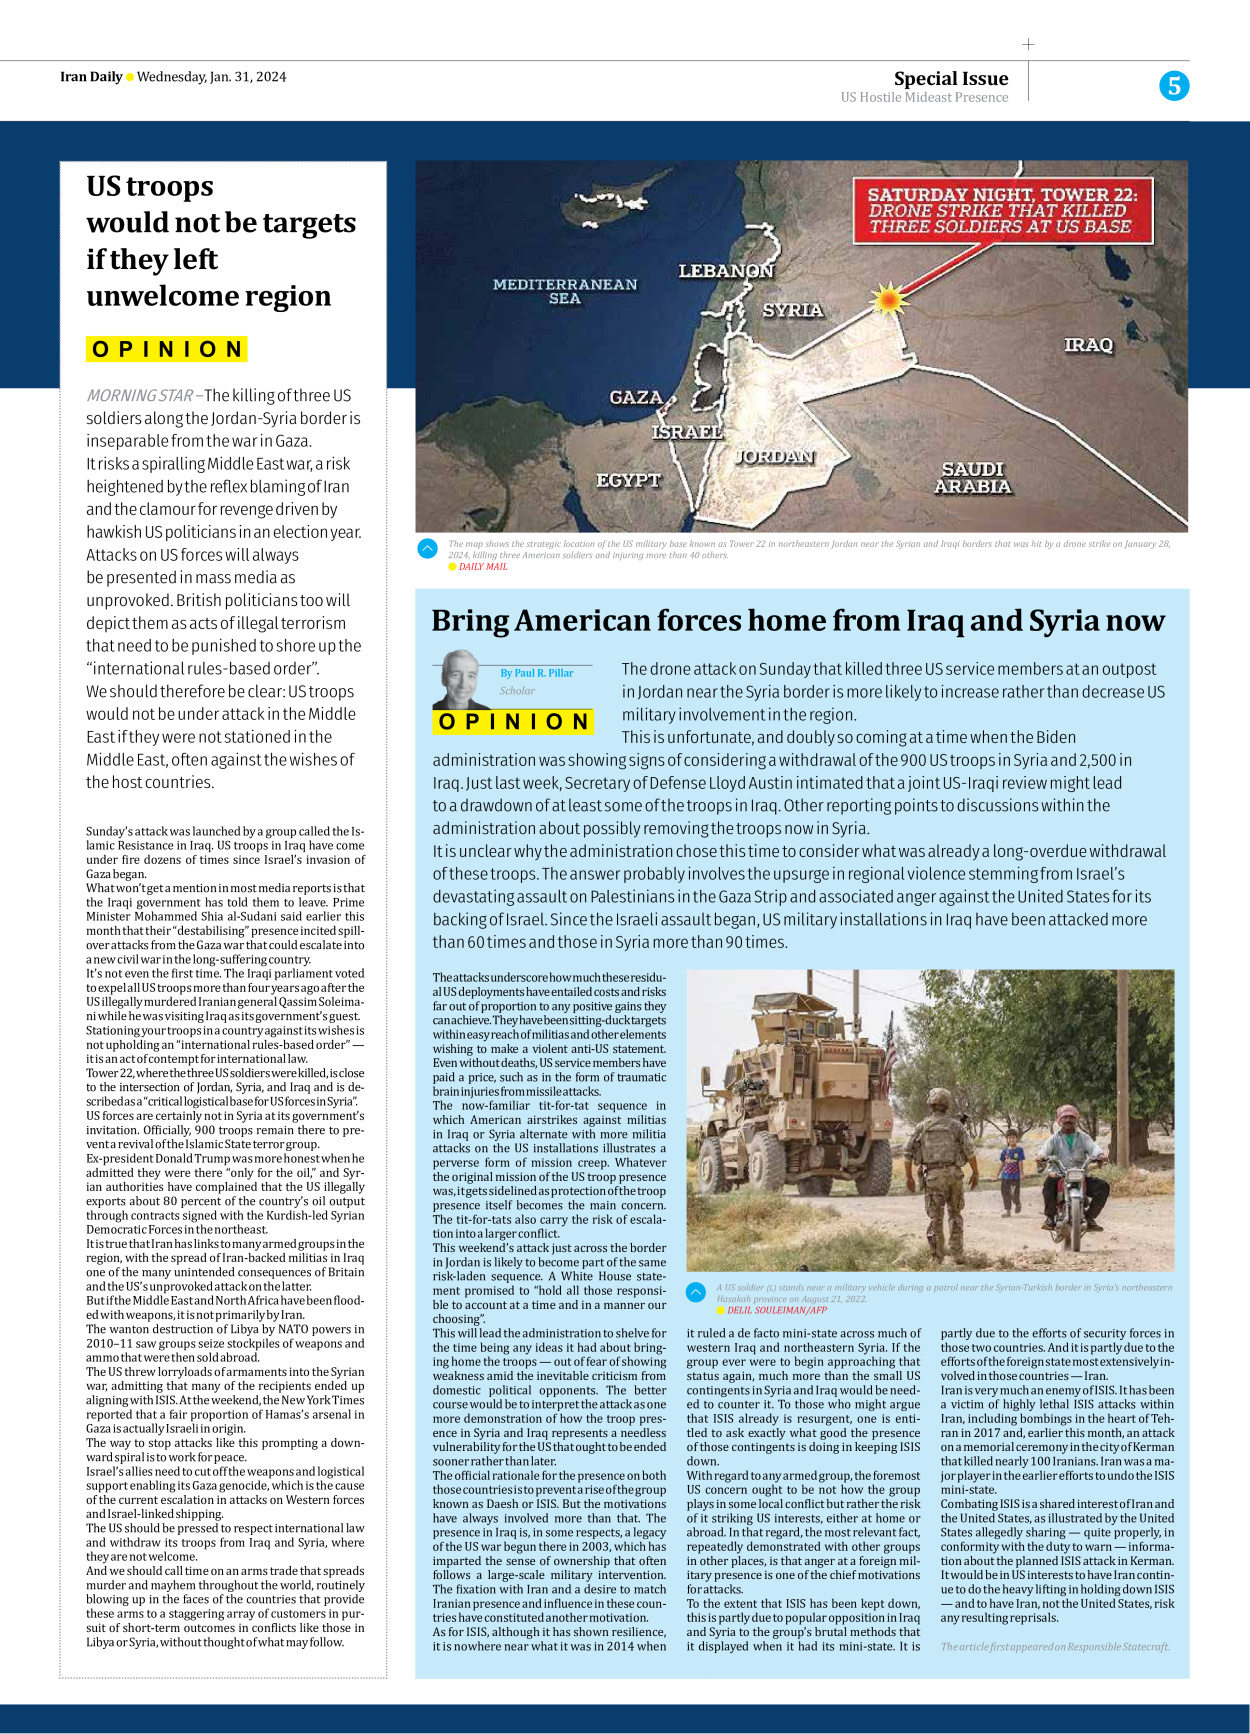 Iran Daily - Number Seven Thousand Four Hundred and Ninety Eight - 31 January 2024 - Page 5